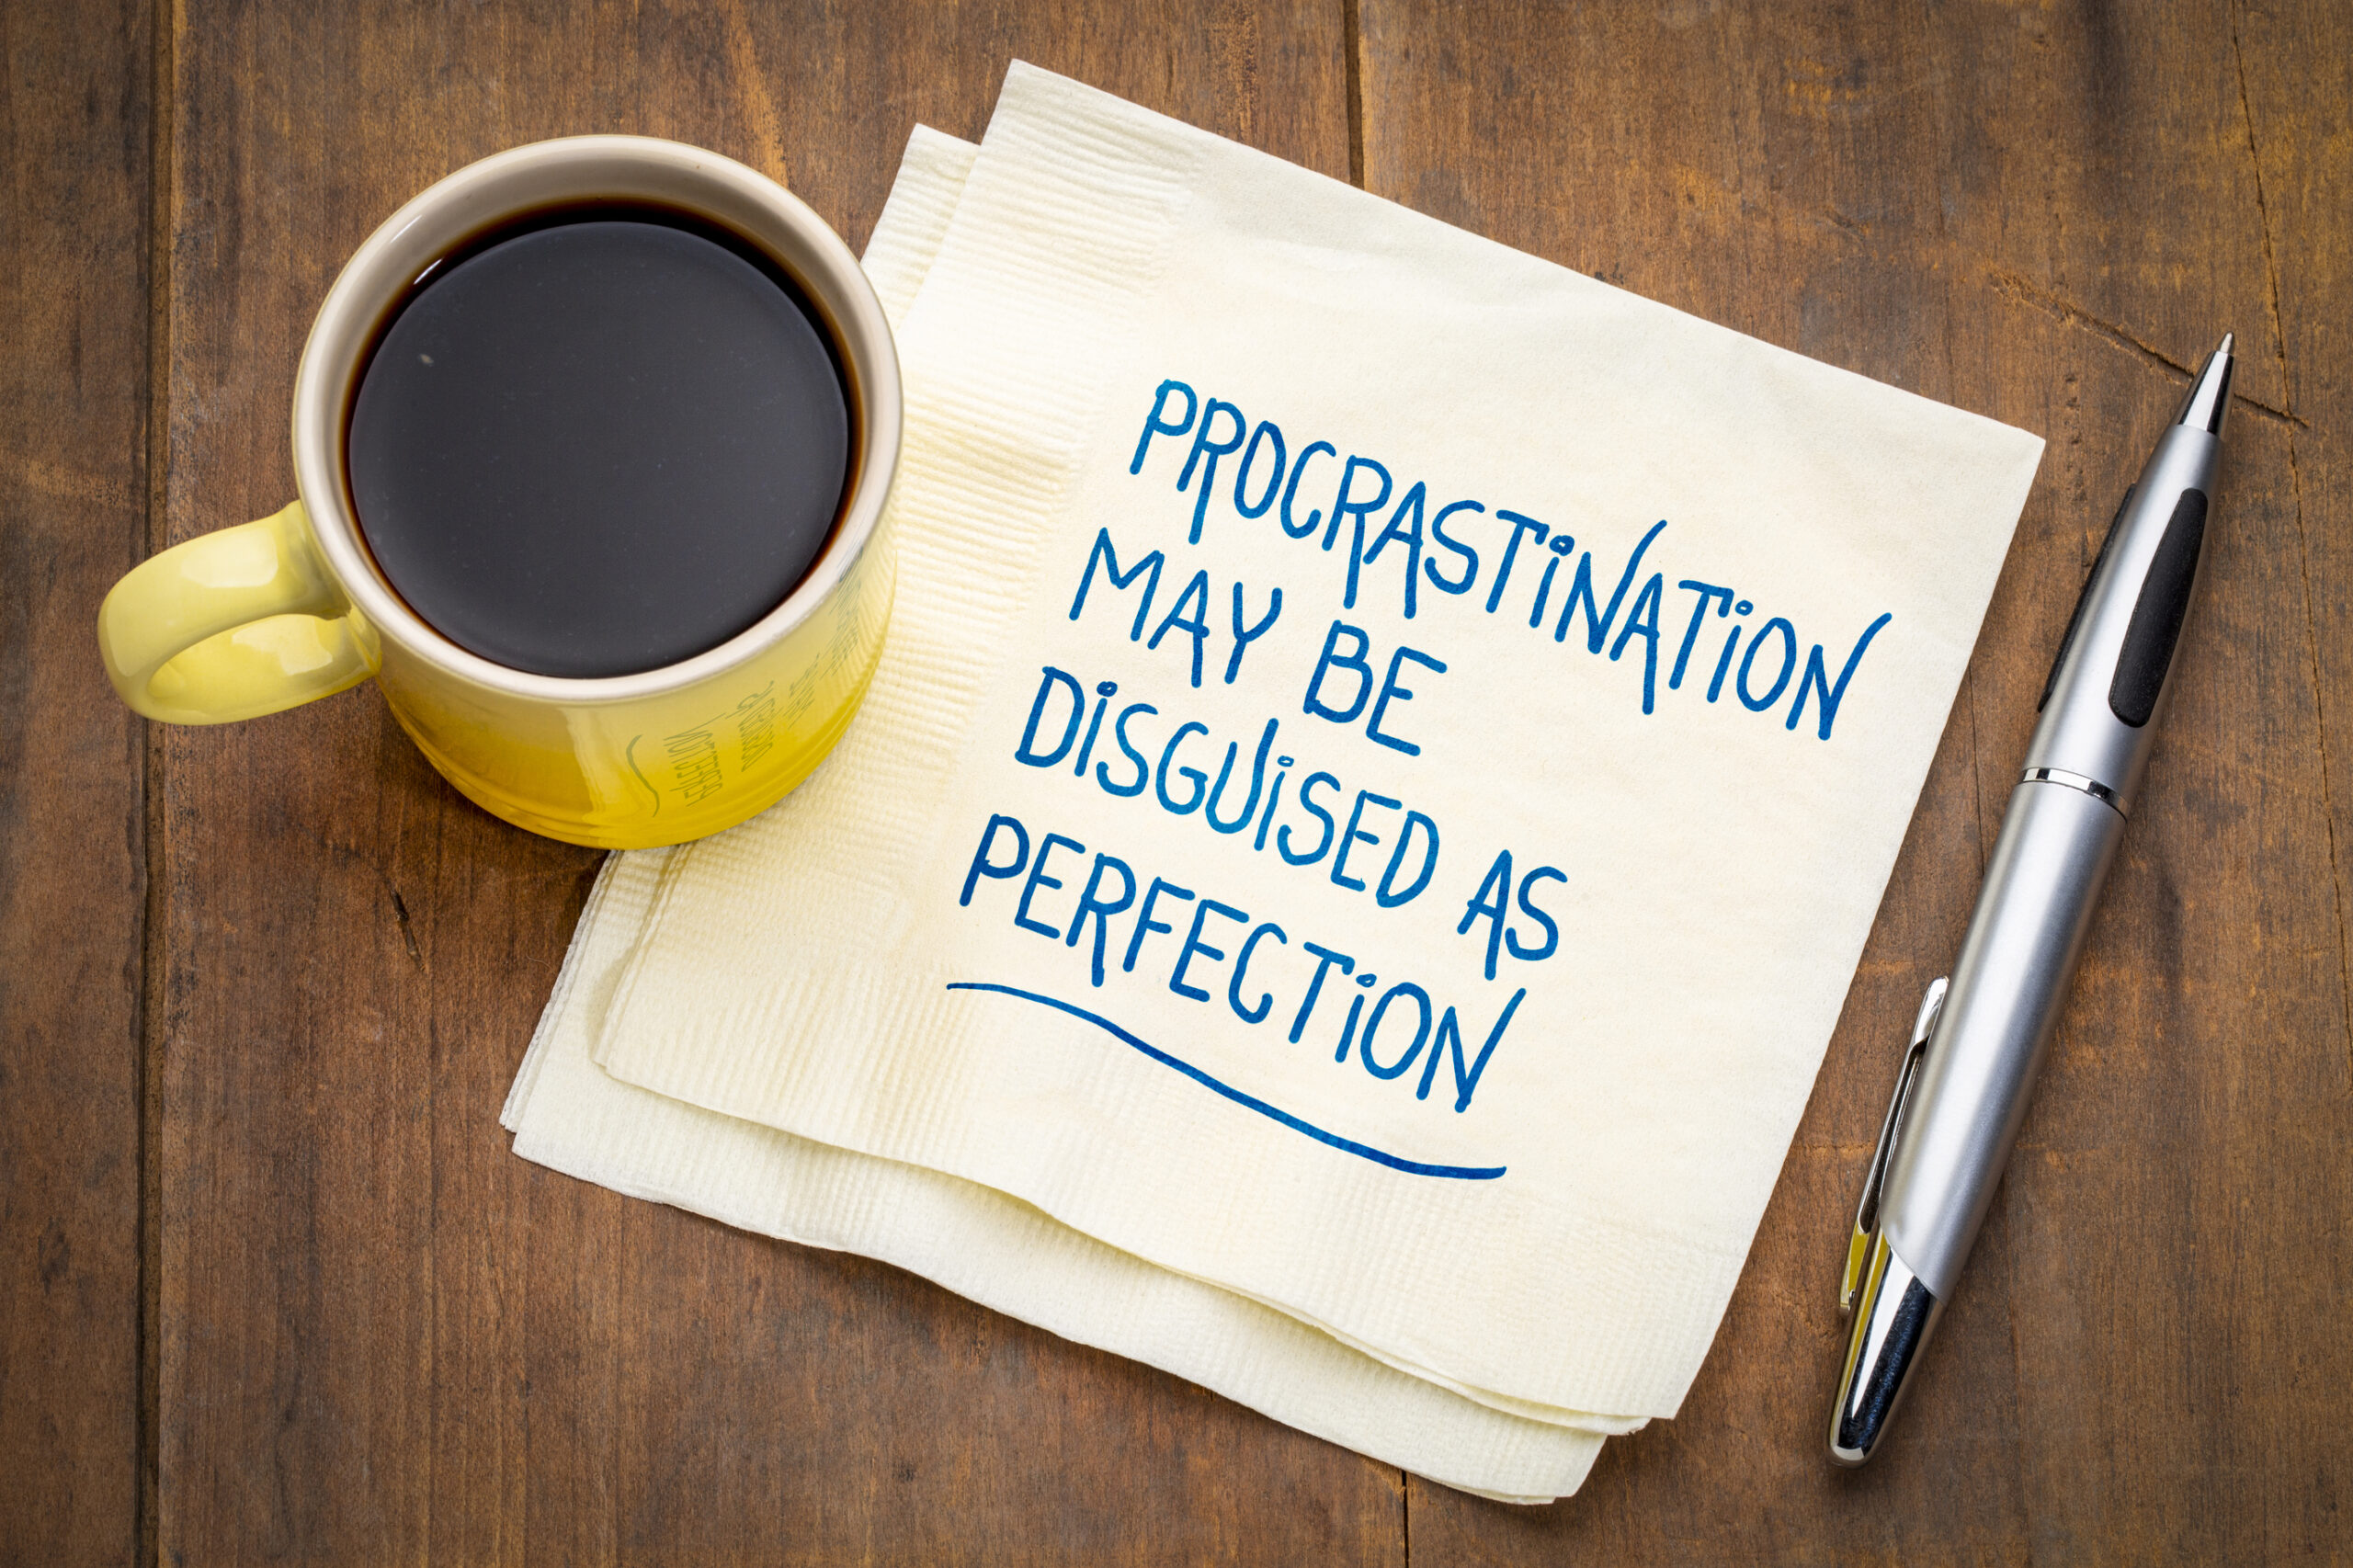 Coffe mug and a napkin that says procrastination may be disguised as perfection